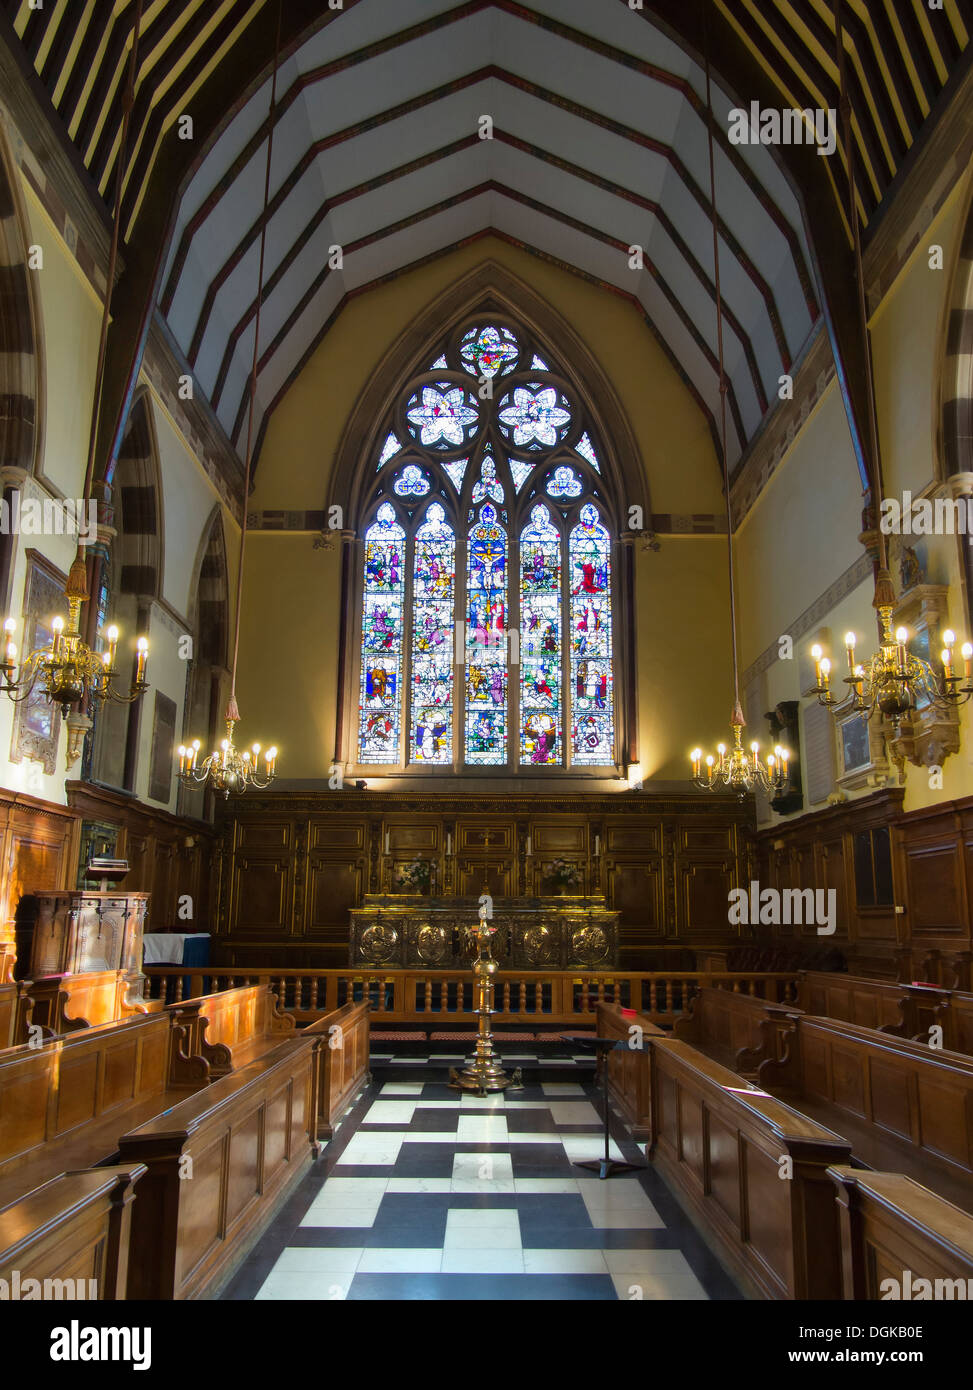 The interior of the Chapel of Balliol College in Oxford. Stock Photo